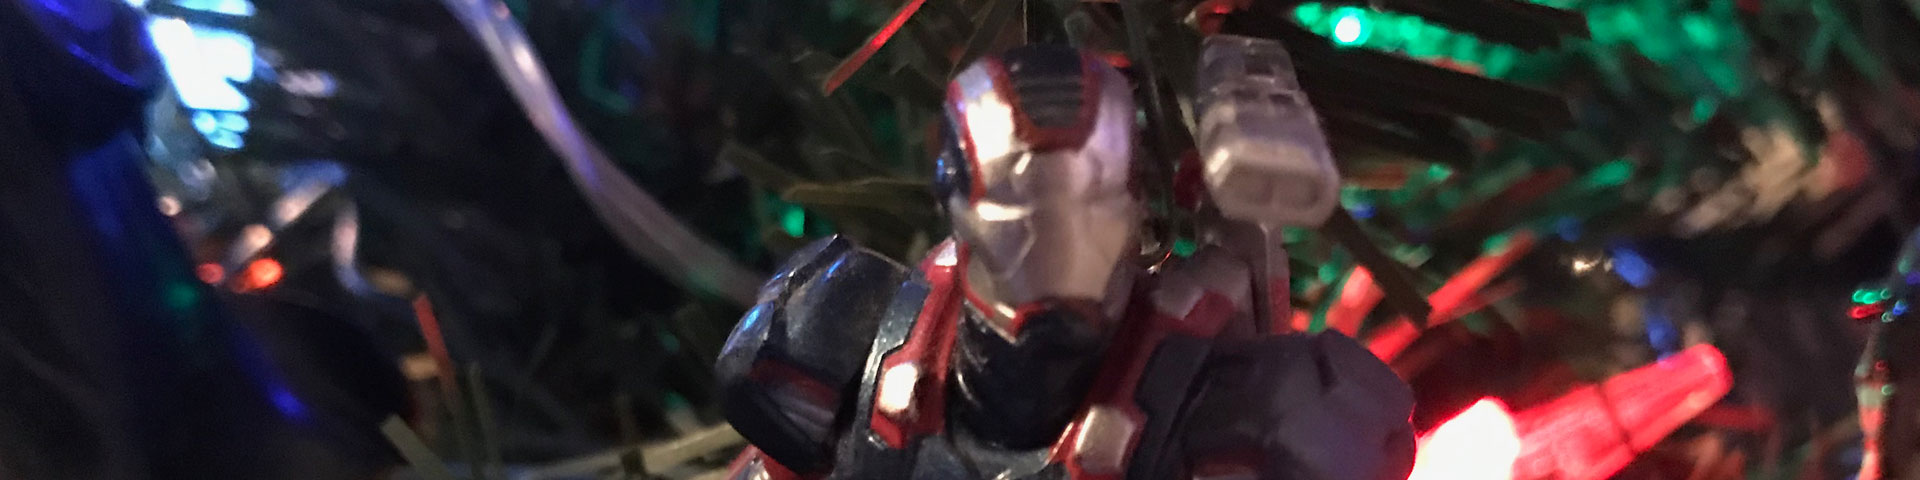 A close up view of the red, white, and blue Iron Man armor.